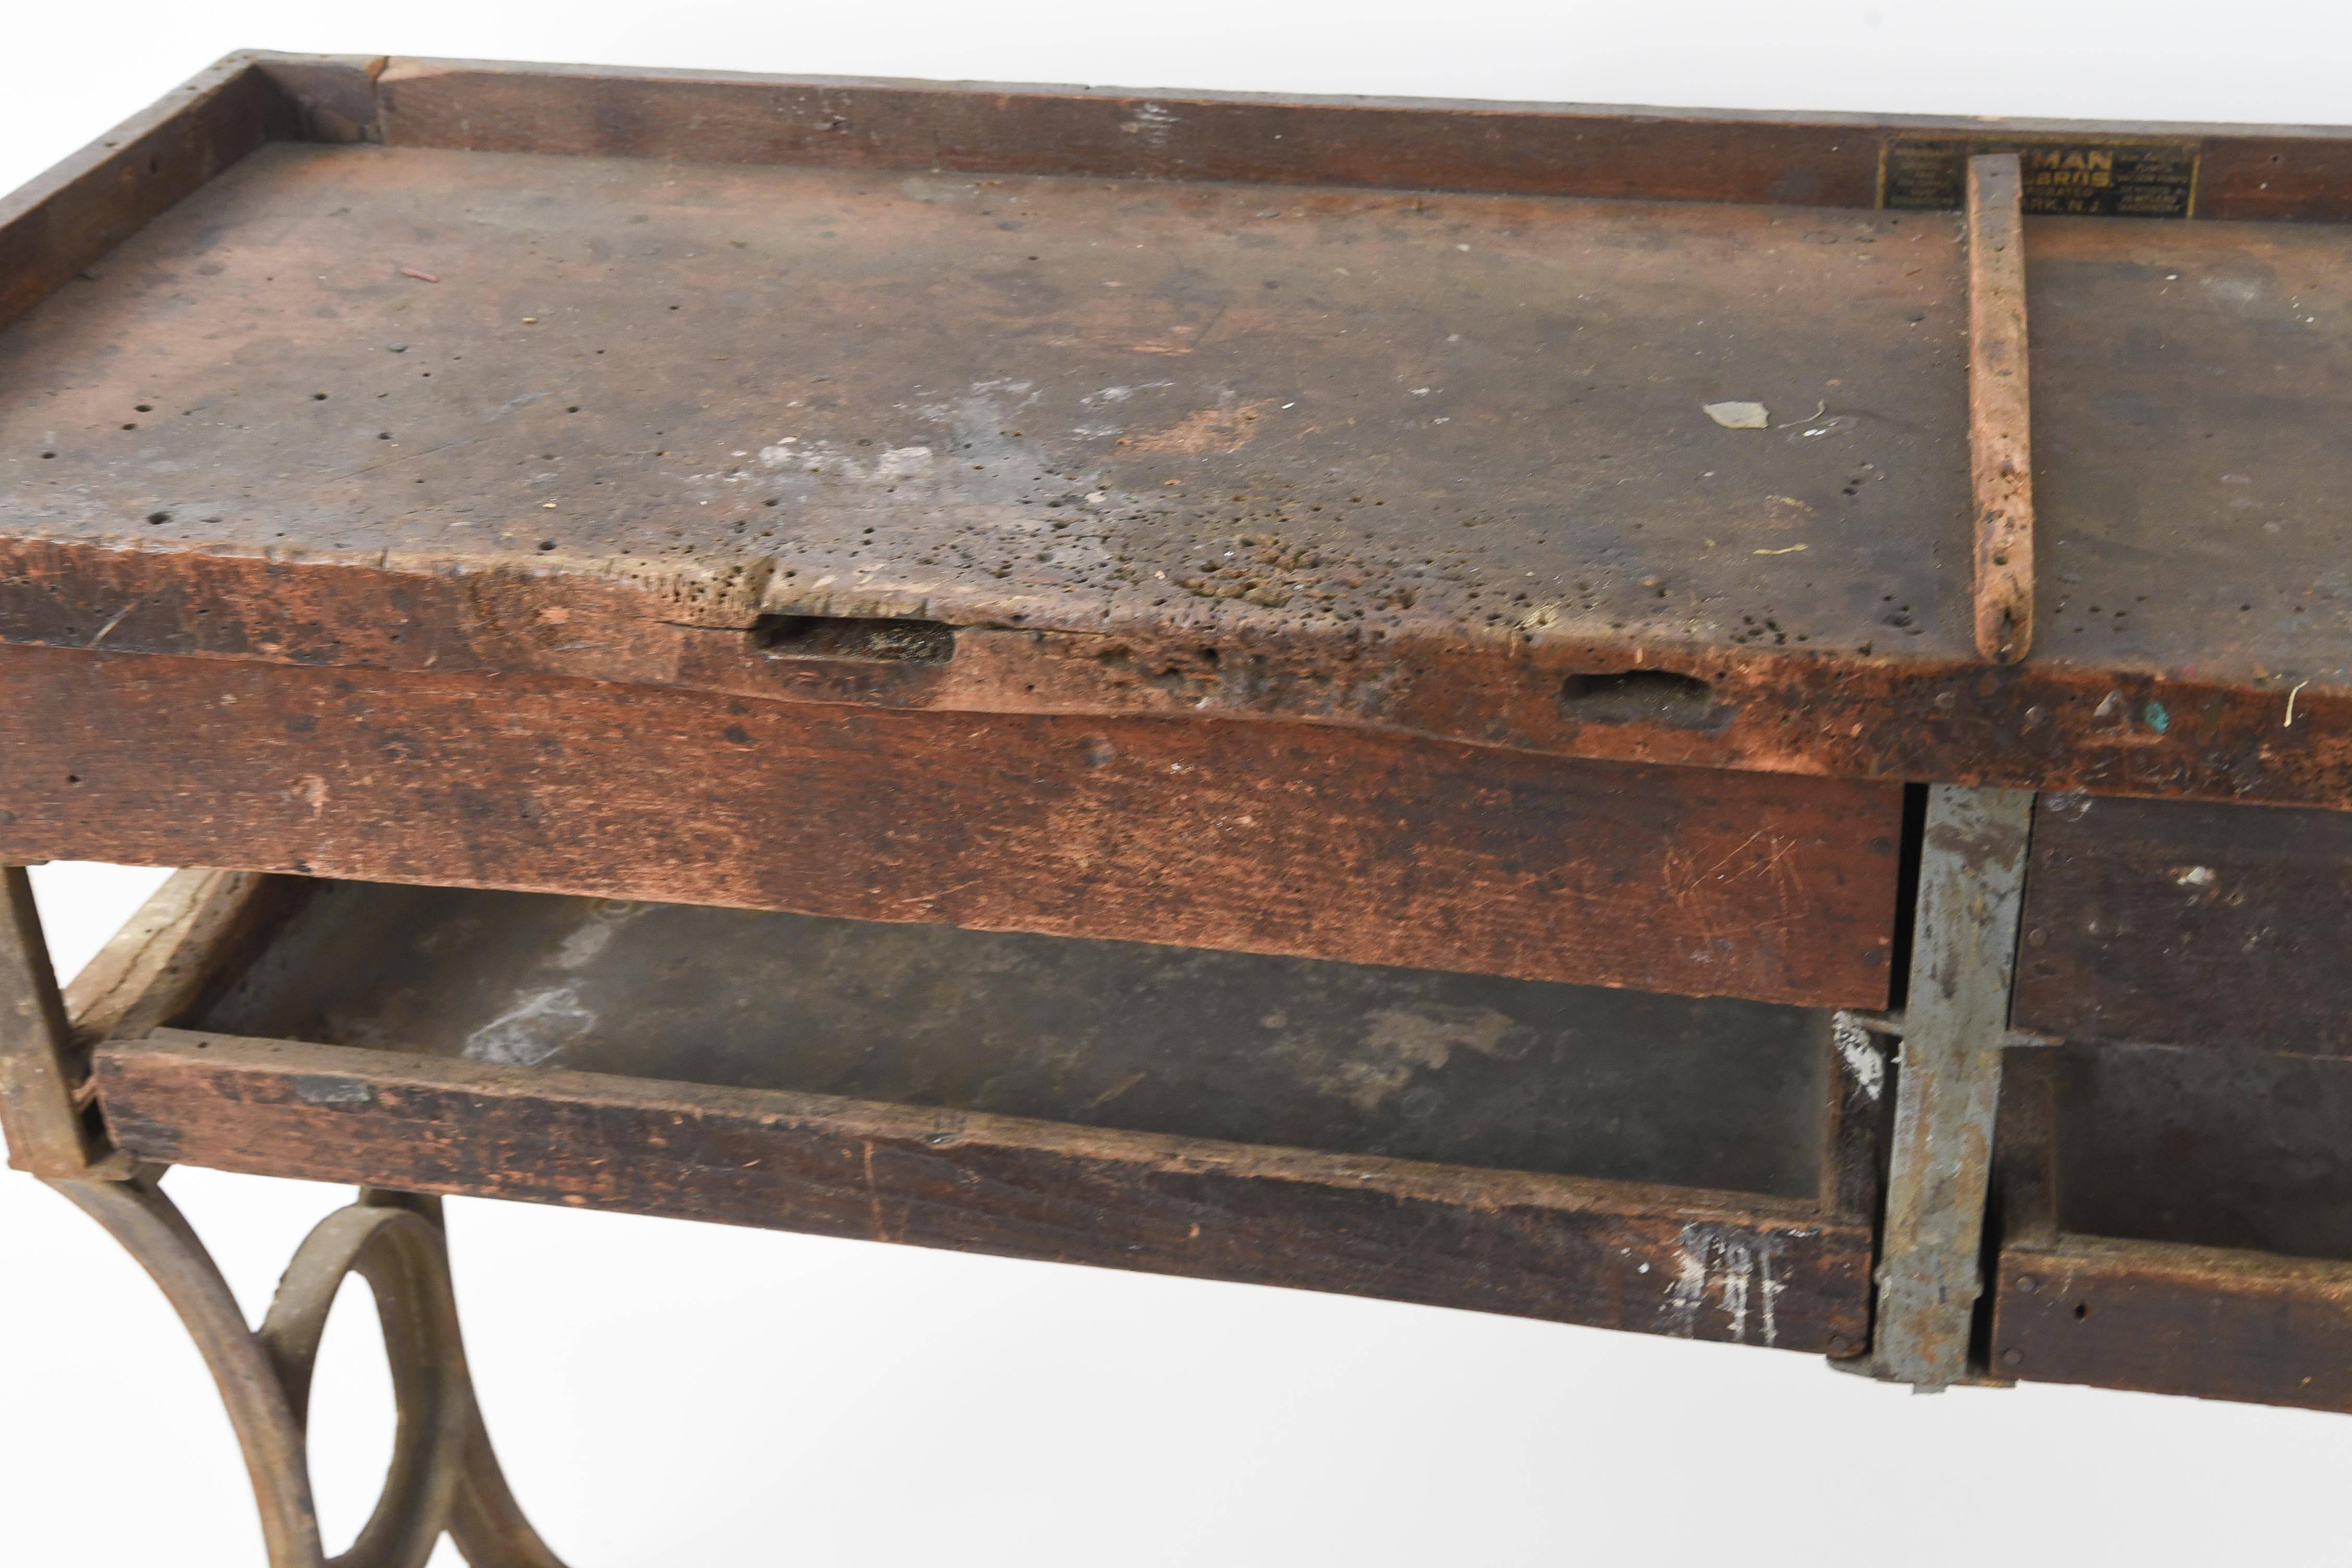 A wonderful designed piece of American Industrial history, this awesome bench with great patina was from a jewelers workroom and would make a wonderful console table in any room.